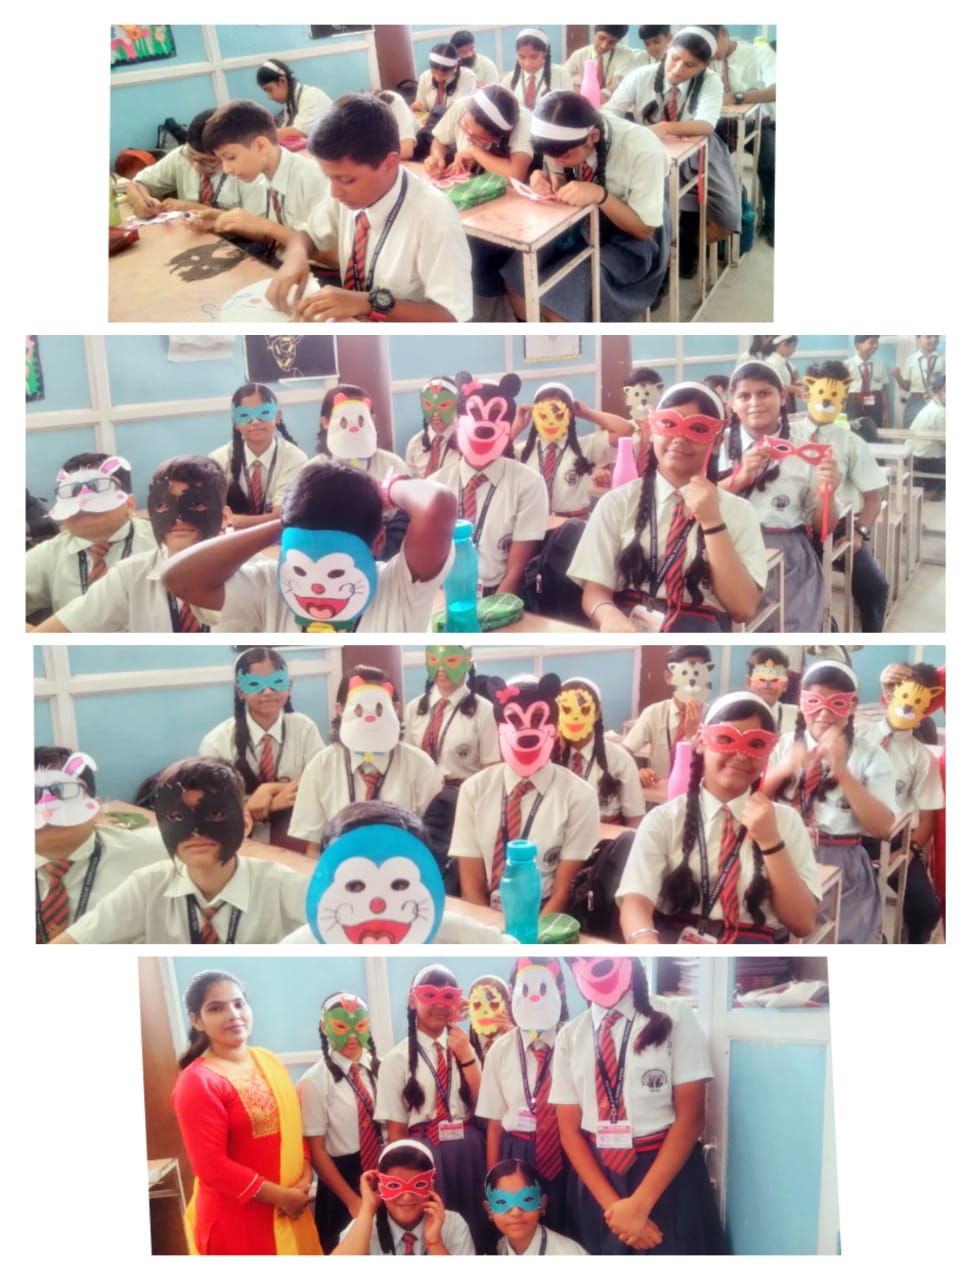 MASK MAKING COMPETITION